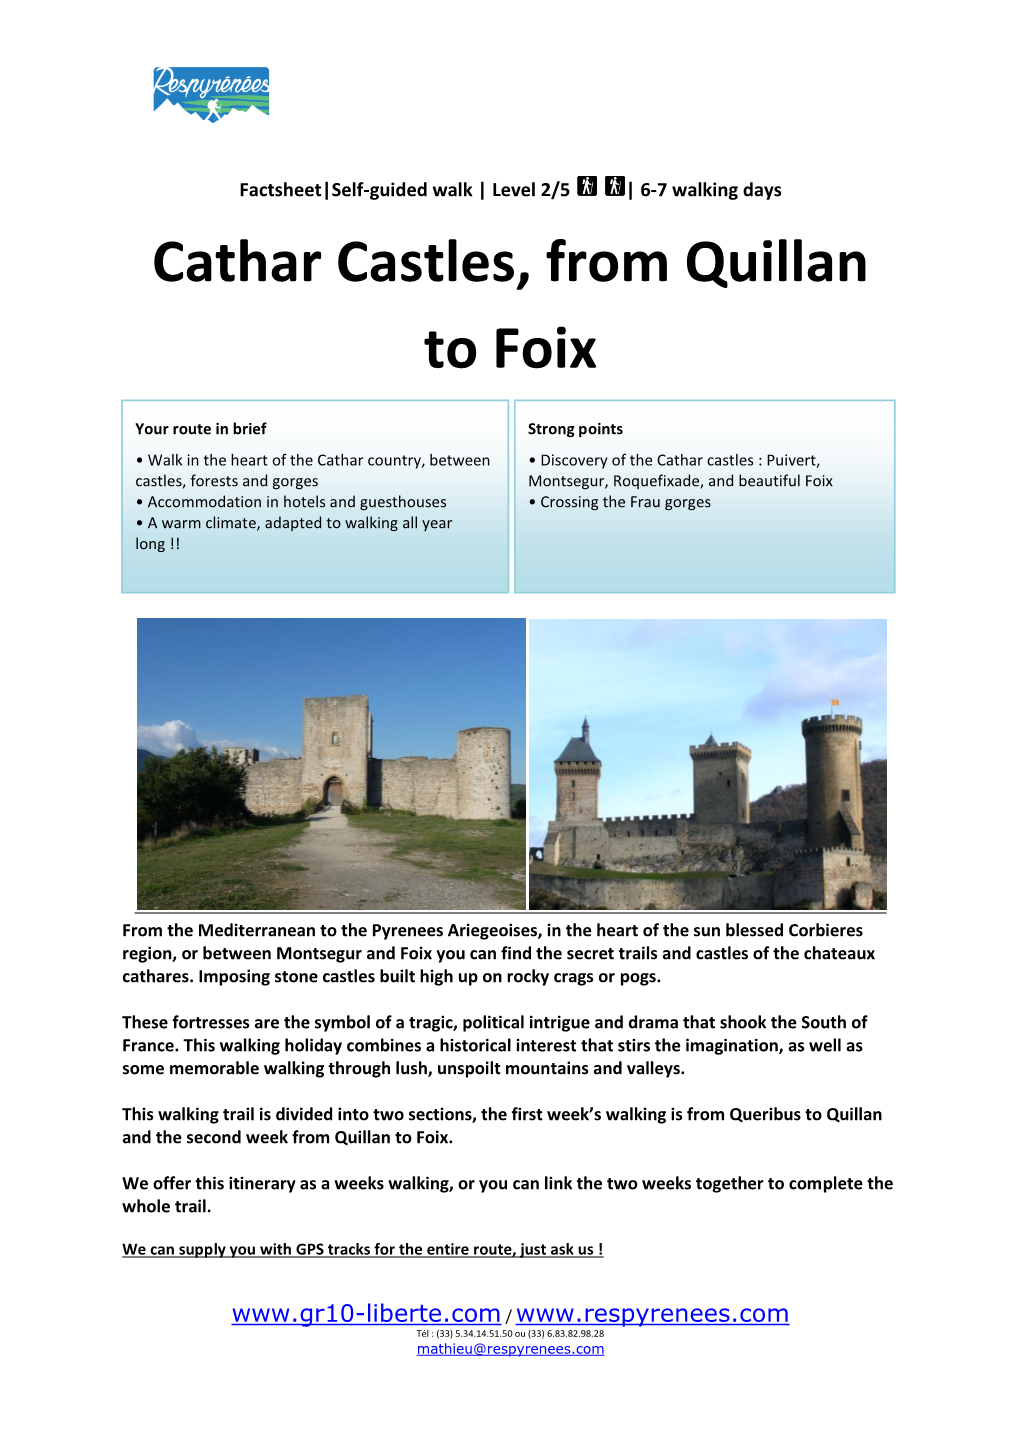 Cathar Castles, from Quillan to Foix